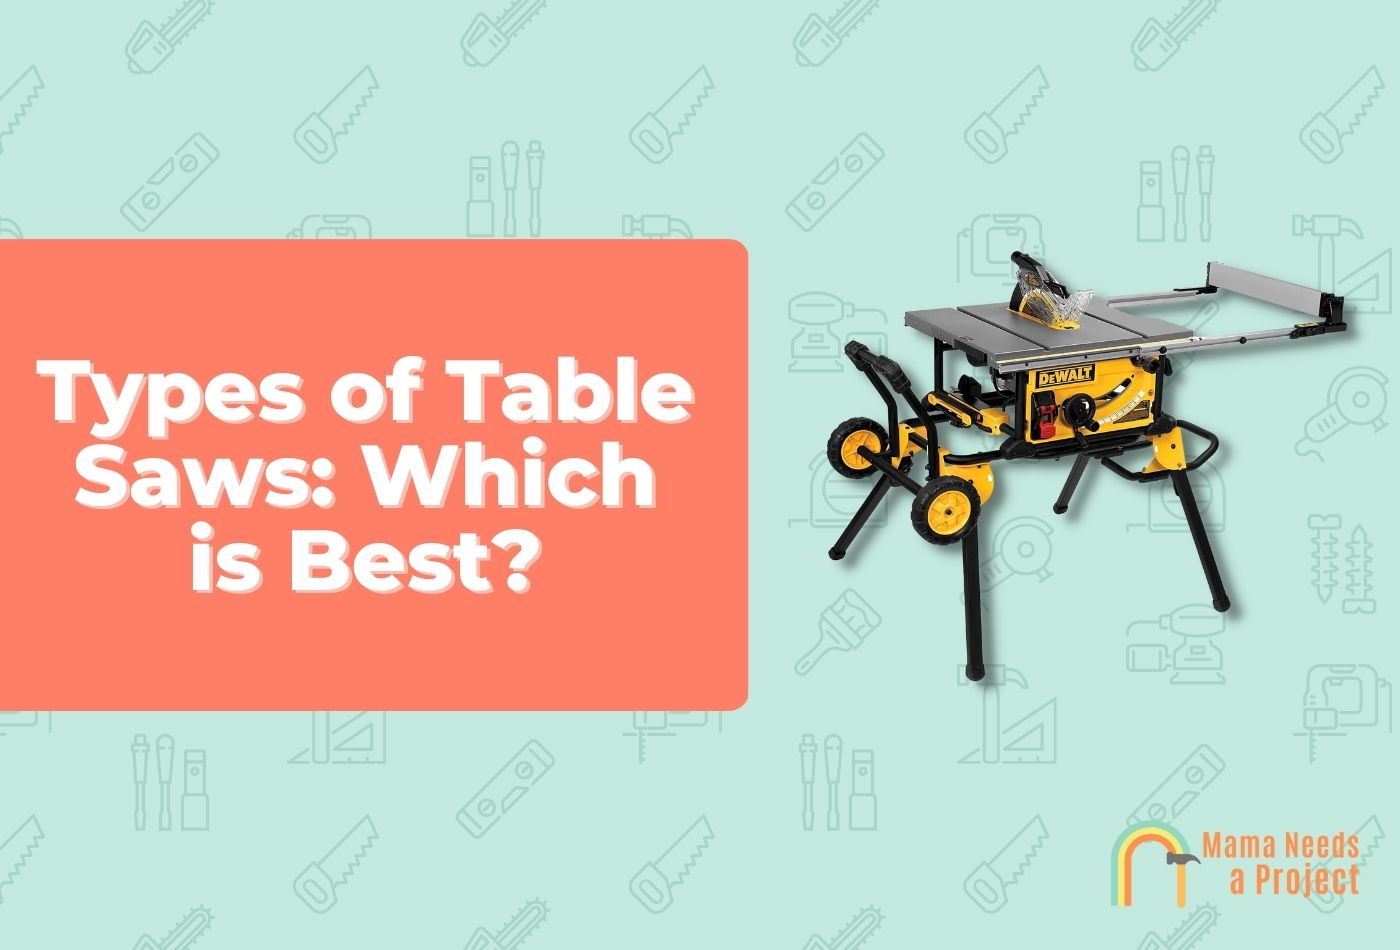 Types of Table Saws